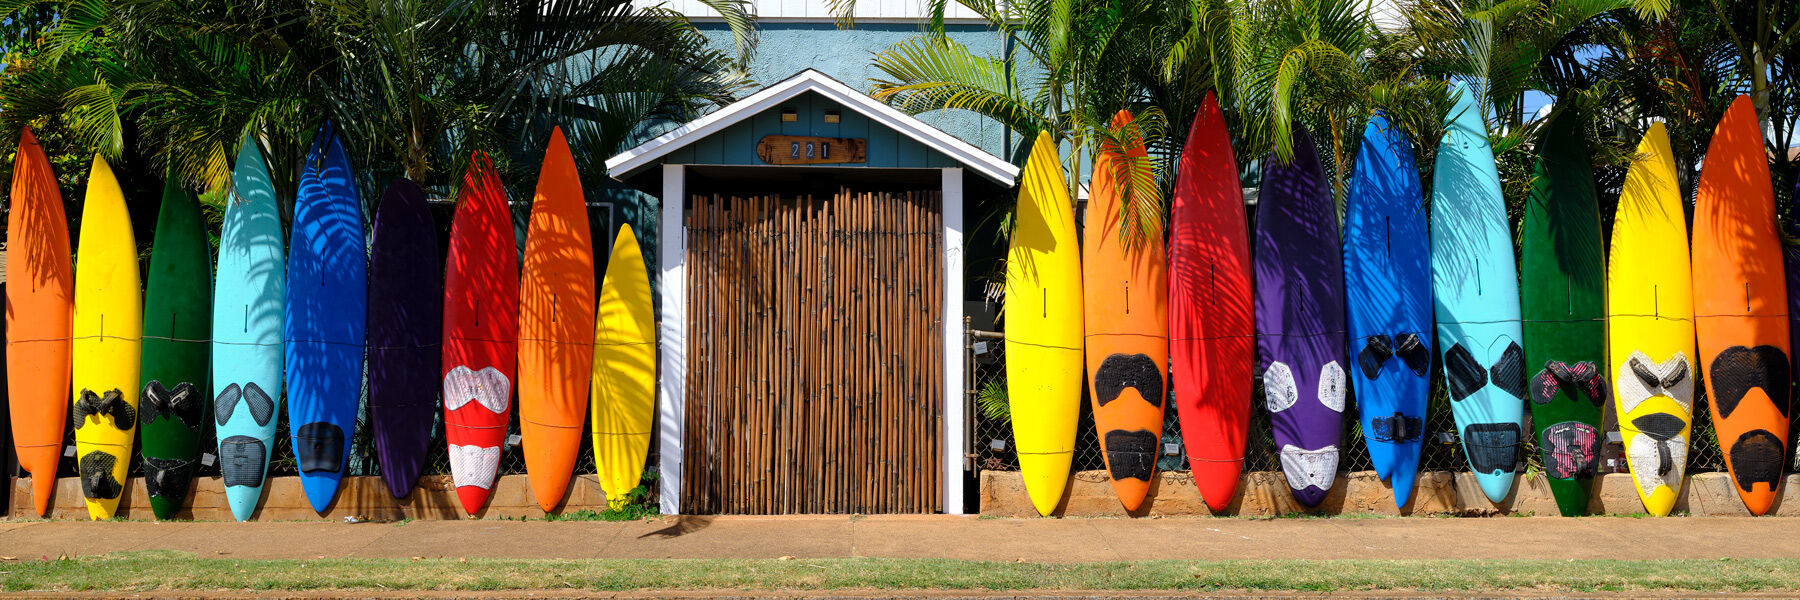 a colorful surfboard fence at the Aloha Surf Hostel located in the town of Paia in Maui, Hawaii photographed by fine art photographer Andrew Shoemaker